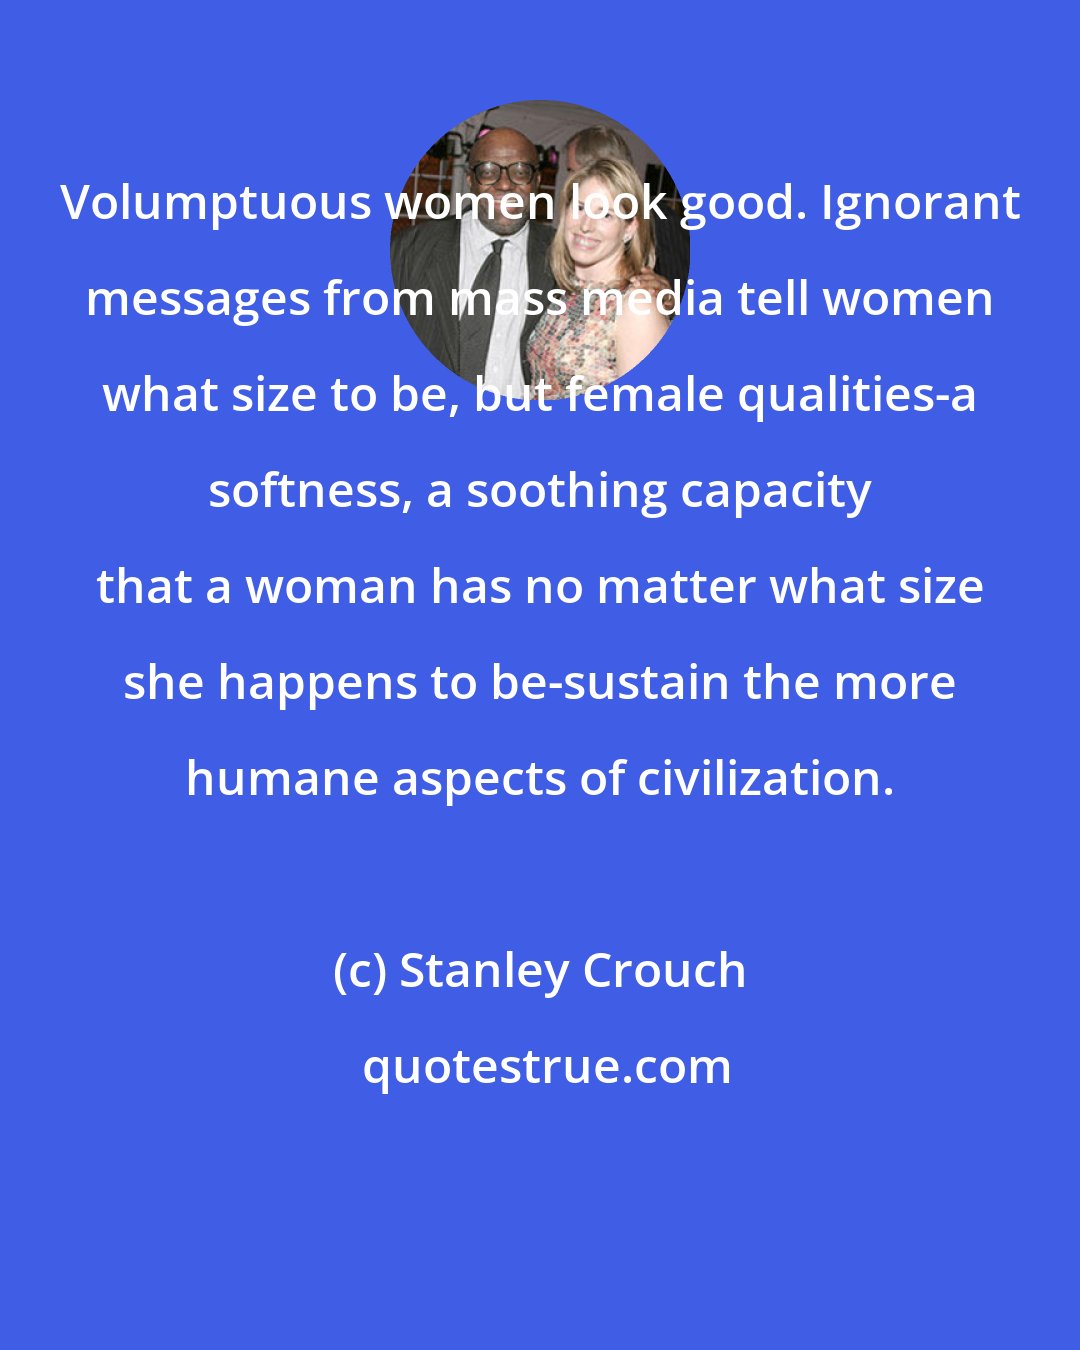 Stanley Crouch: Volumptuous women look good. Ignorant messages from mass media tell women what size to be, but female qualities-a softness, a soothing capacity that a woman has no matter what size she happens to be-sustain the more humane aspects of civilization.